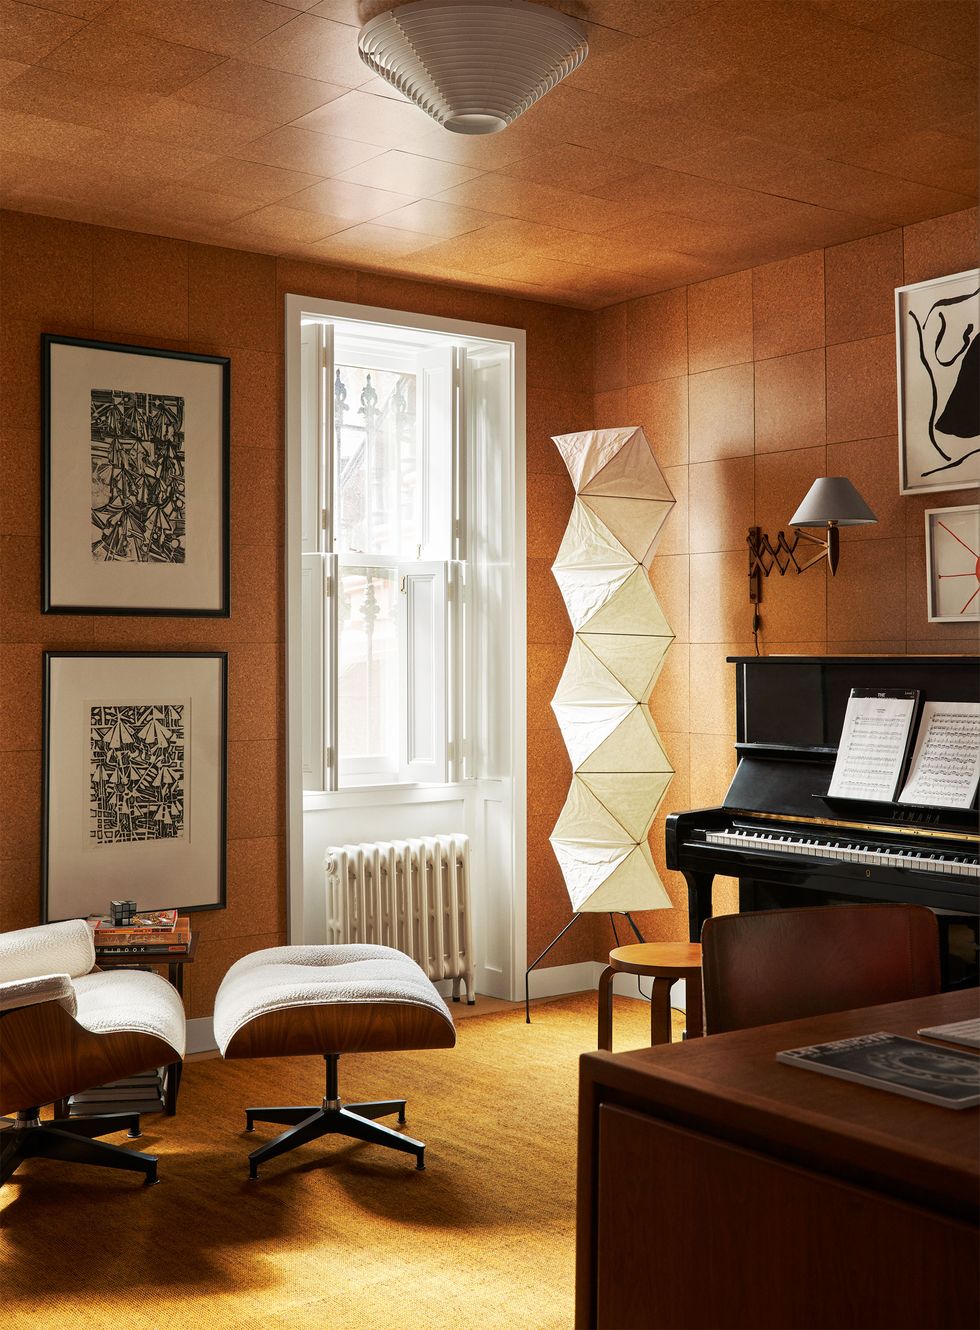 office and music room has a desk and chair, reclining chair with ottoman, an upright piano with accordion arm sconce, artworks above piano and next to recliner, tall paper floor lamp, corks walls and ceiling